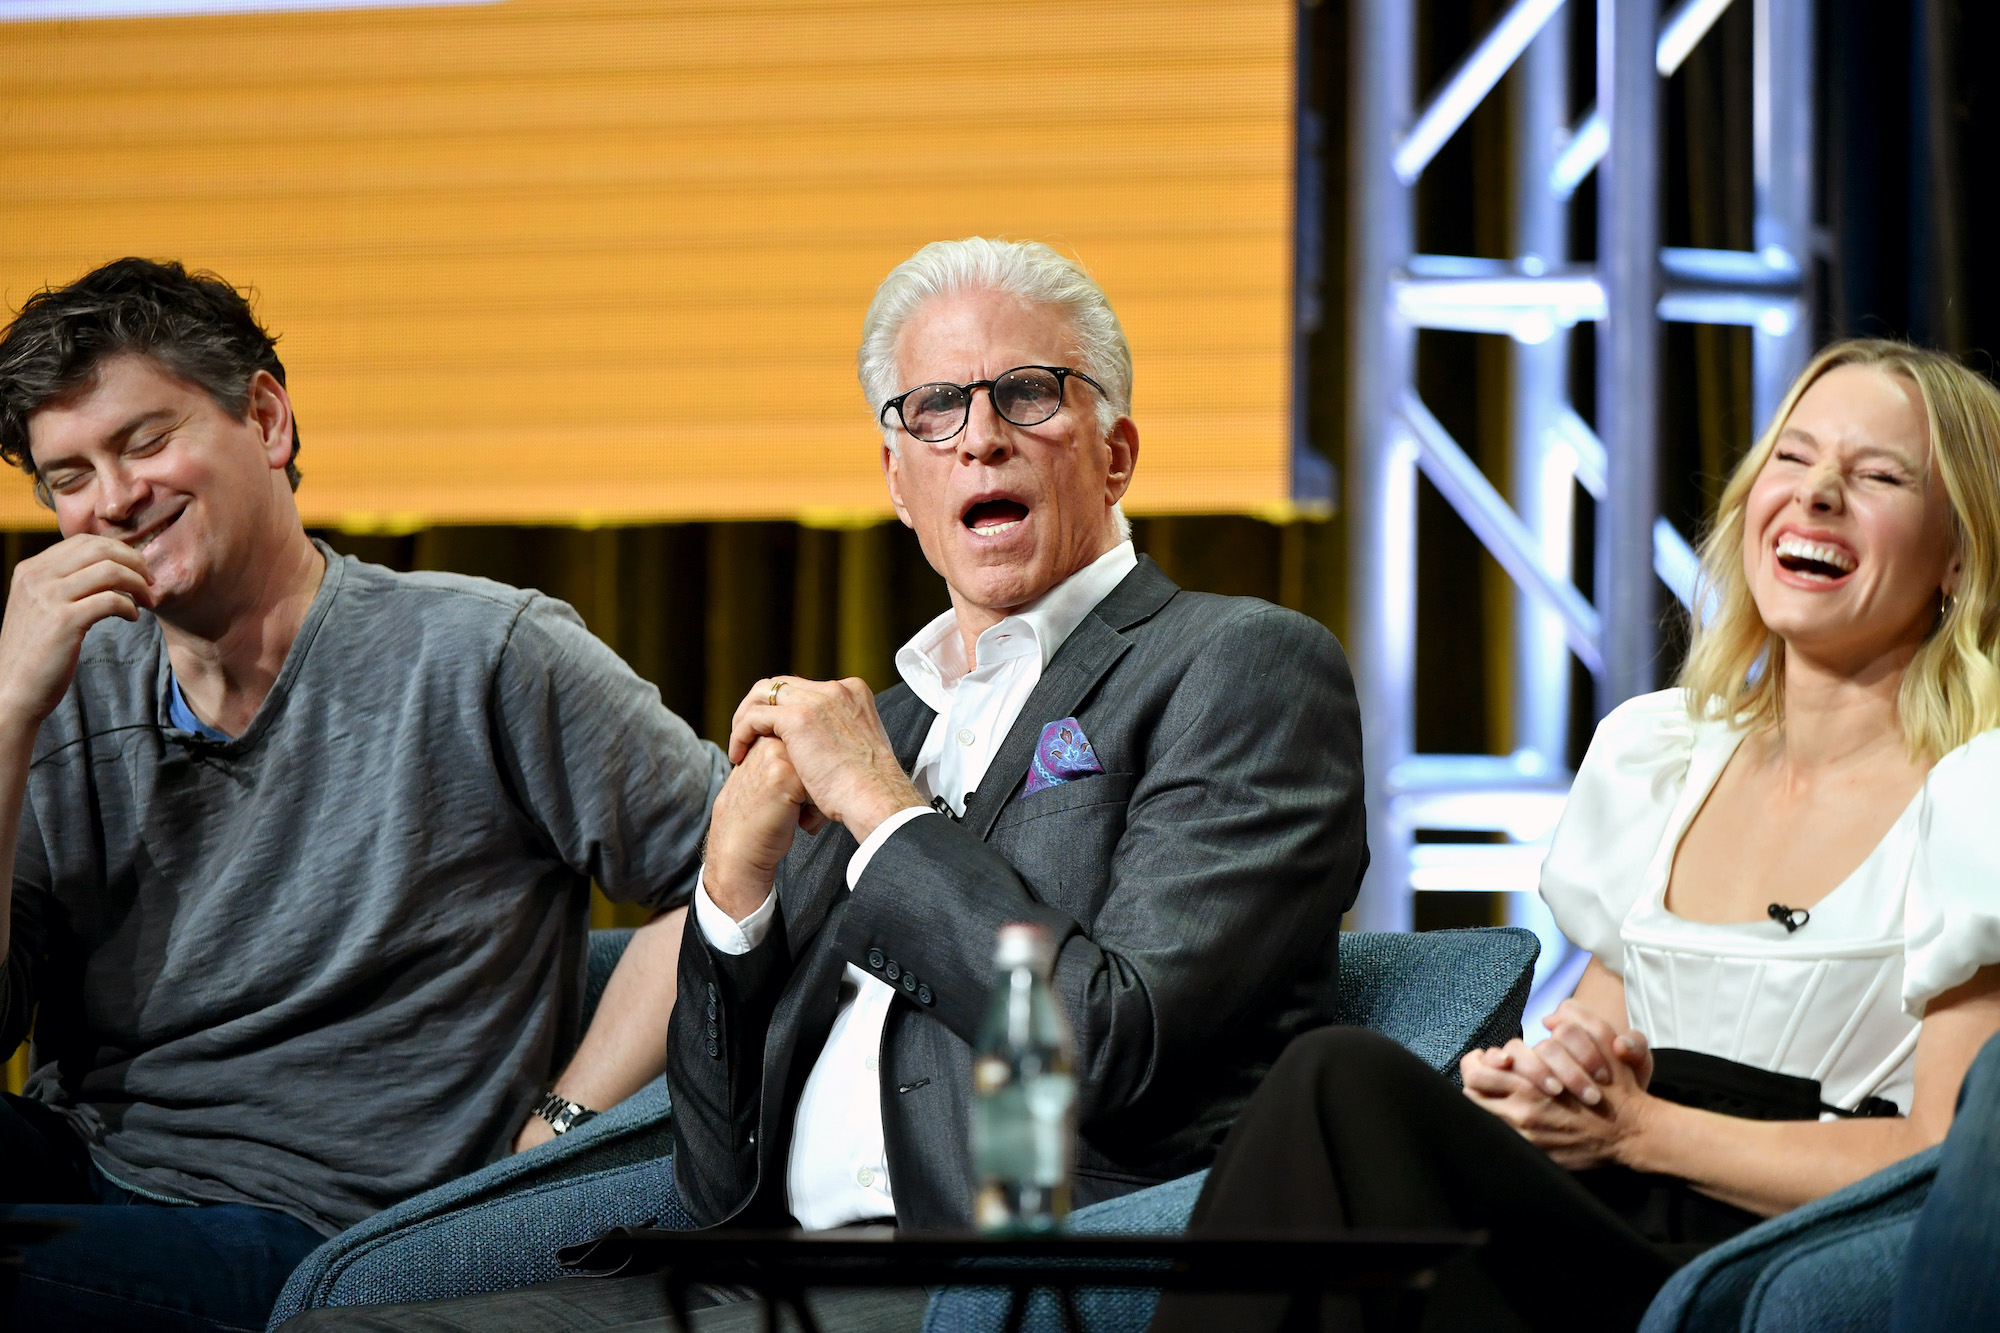 Michael Schur, Ted Danson, and Kristen Bell of 'The Good Place'